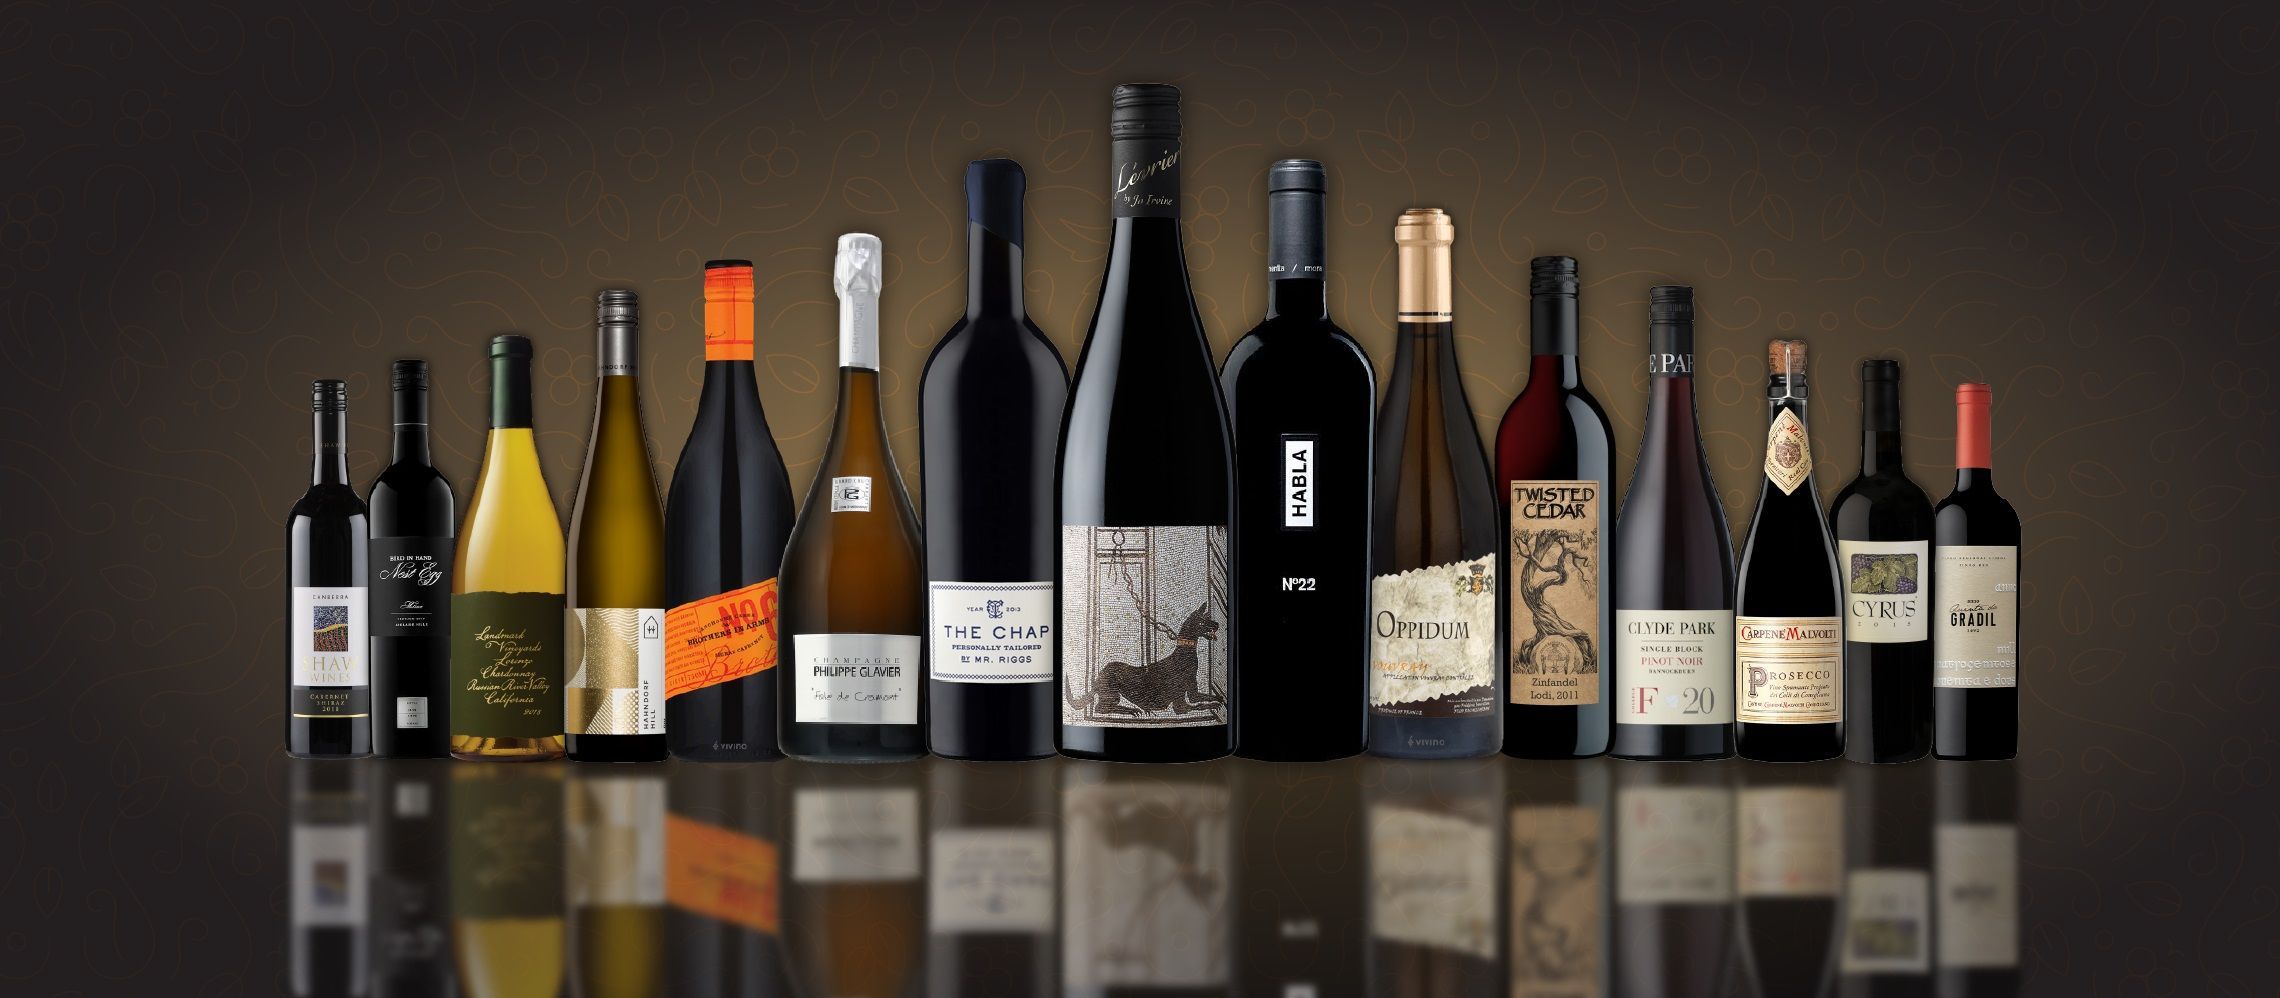 Photo for: London Wine Competition targets new 2022 entries